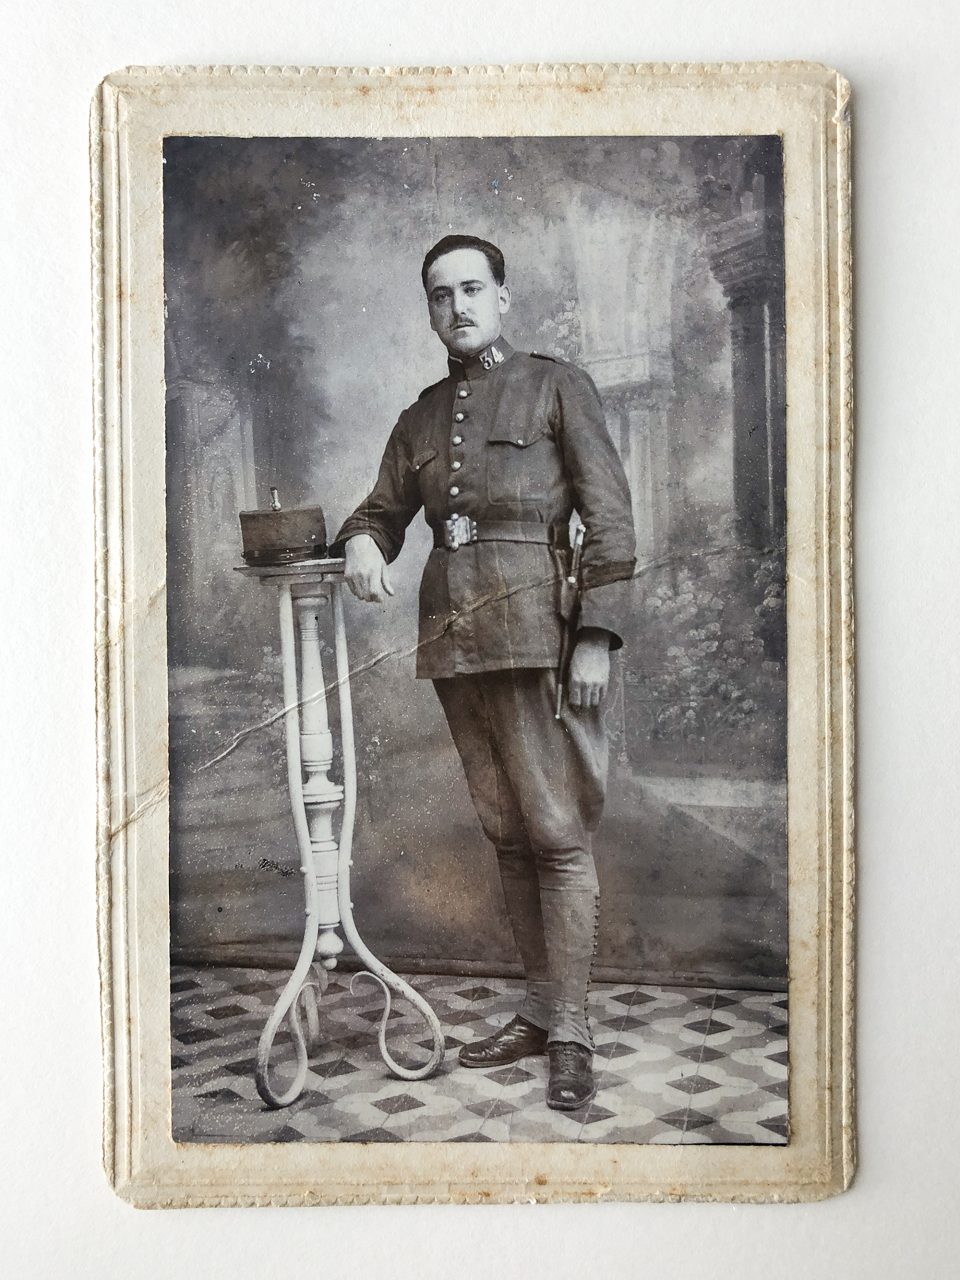 Cabinet card from 1923, featuring a portrait of Spanish army soldier Diego Rodriguez Sánches. He would have been serving during the Rif War with Morocco when this photo was made.